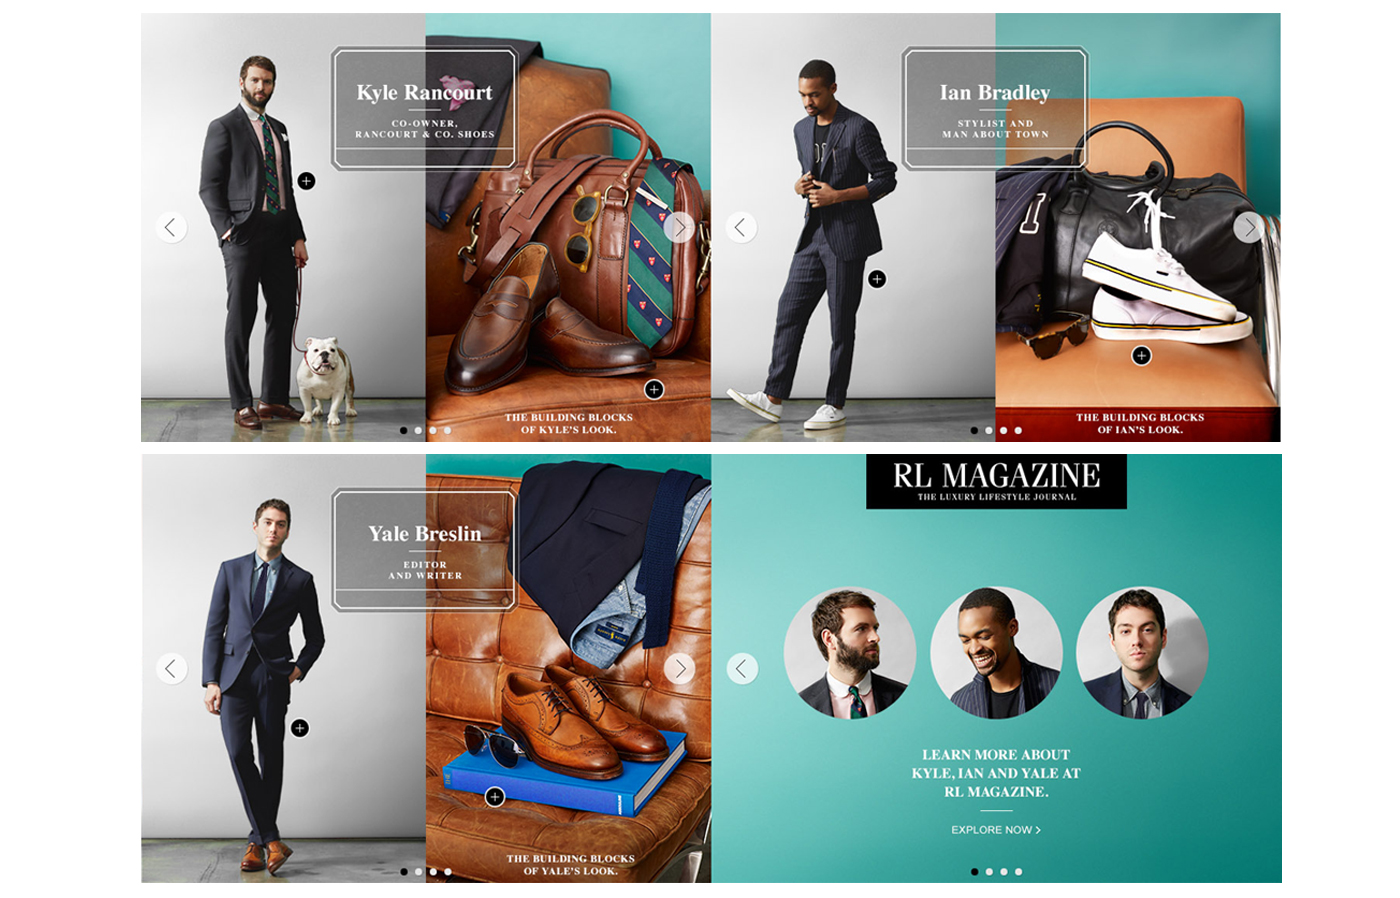 THE POLO SUIT SHOP AND CAMPAIGN